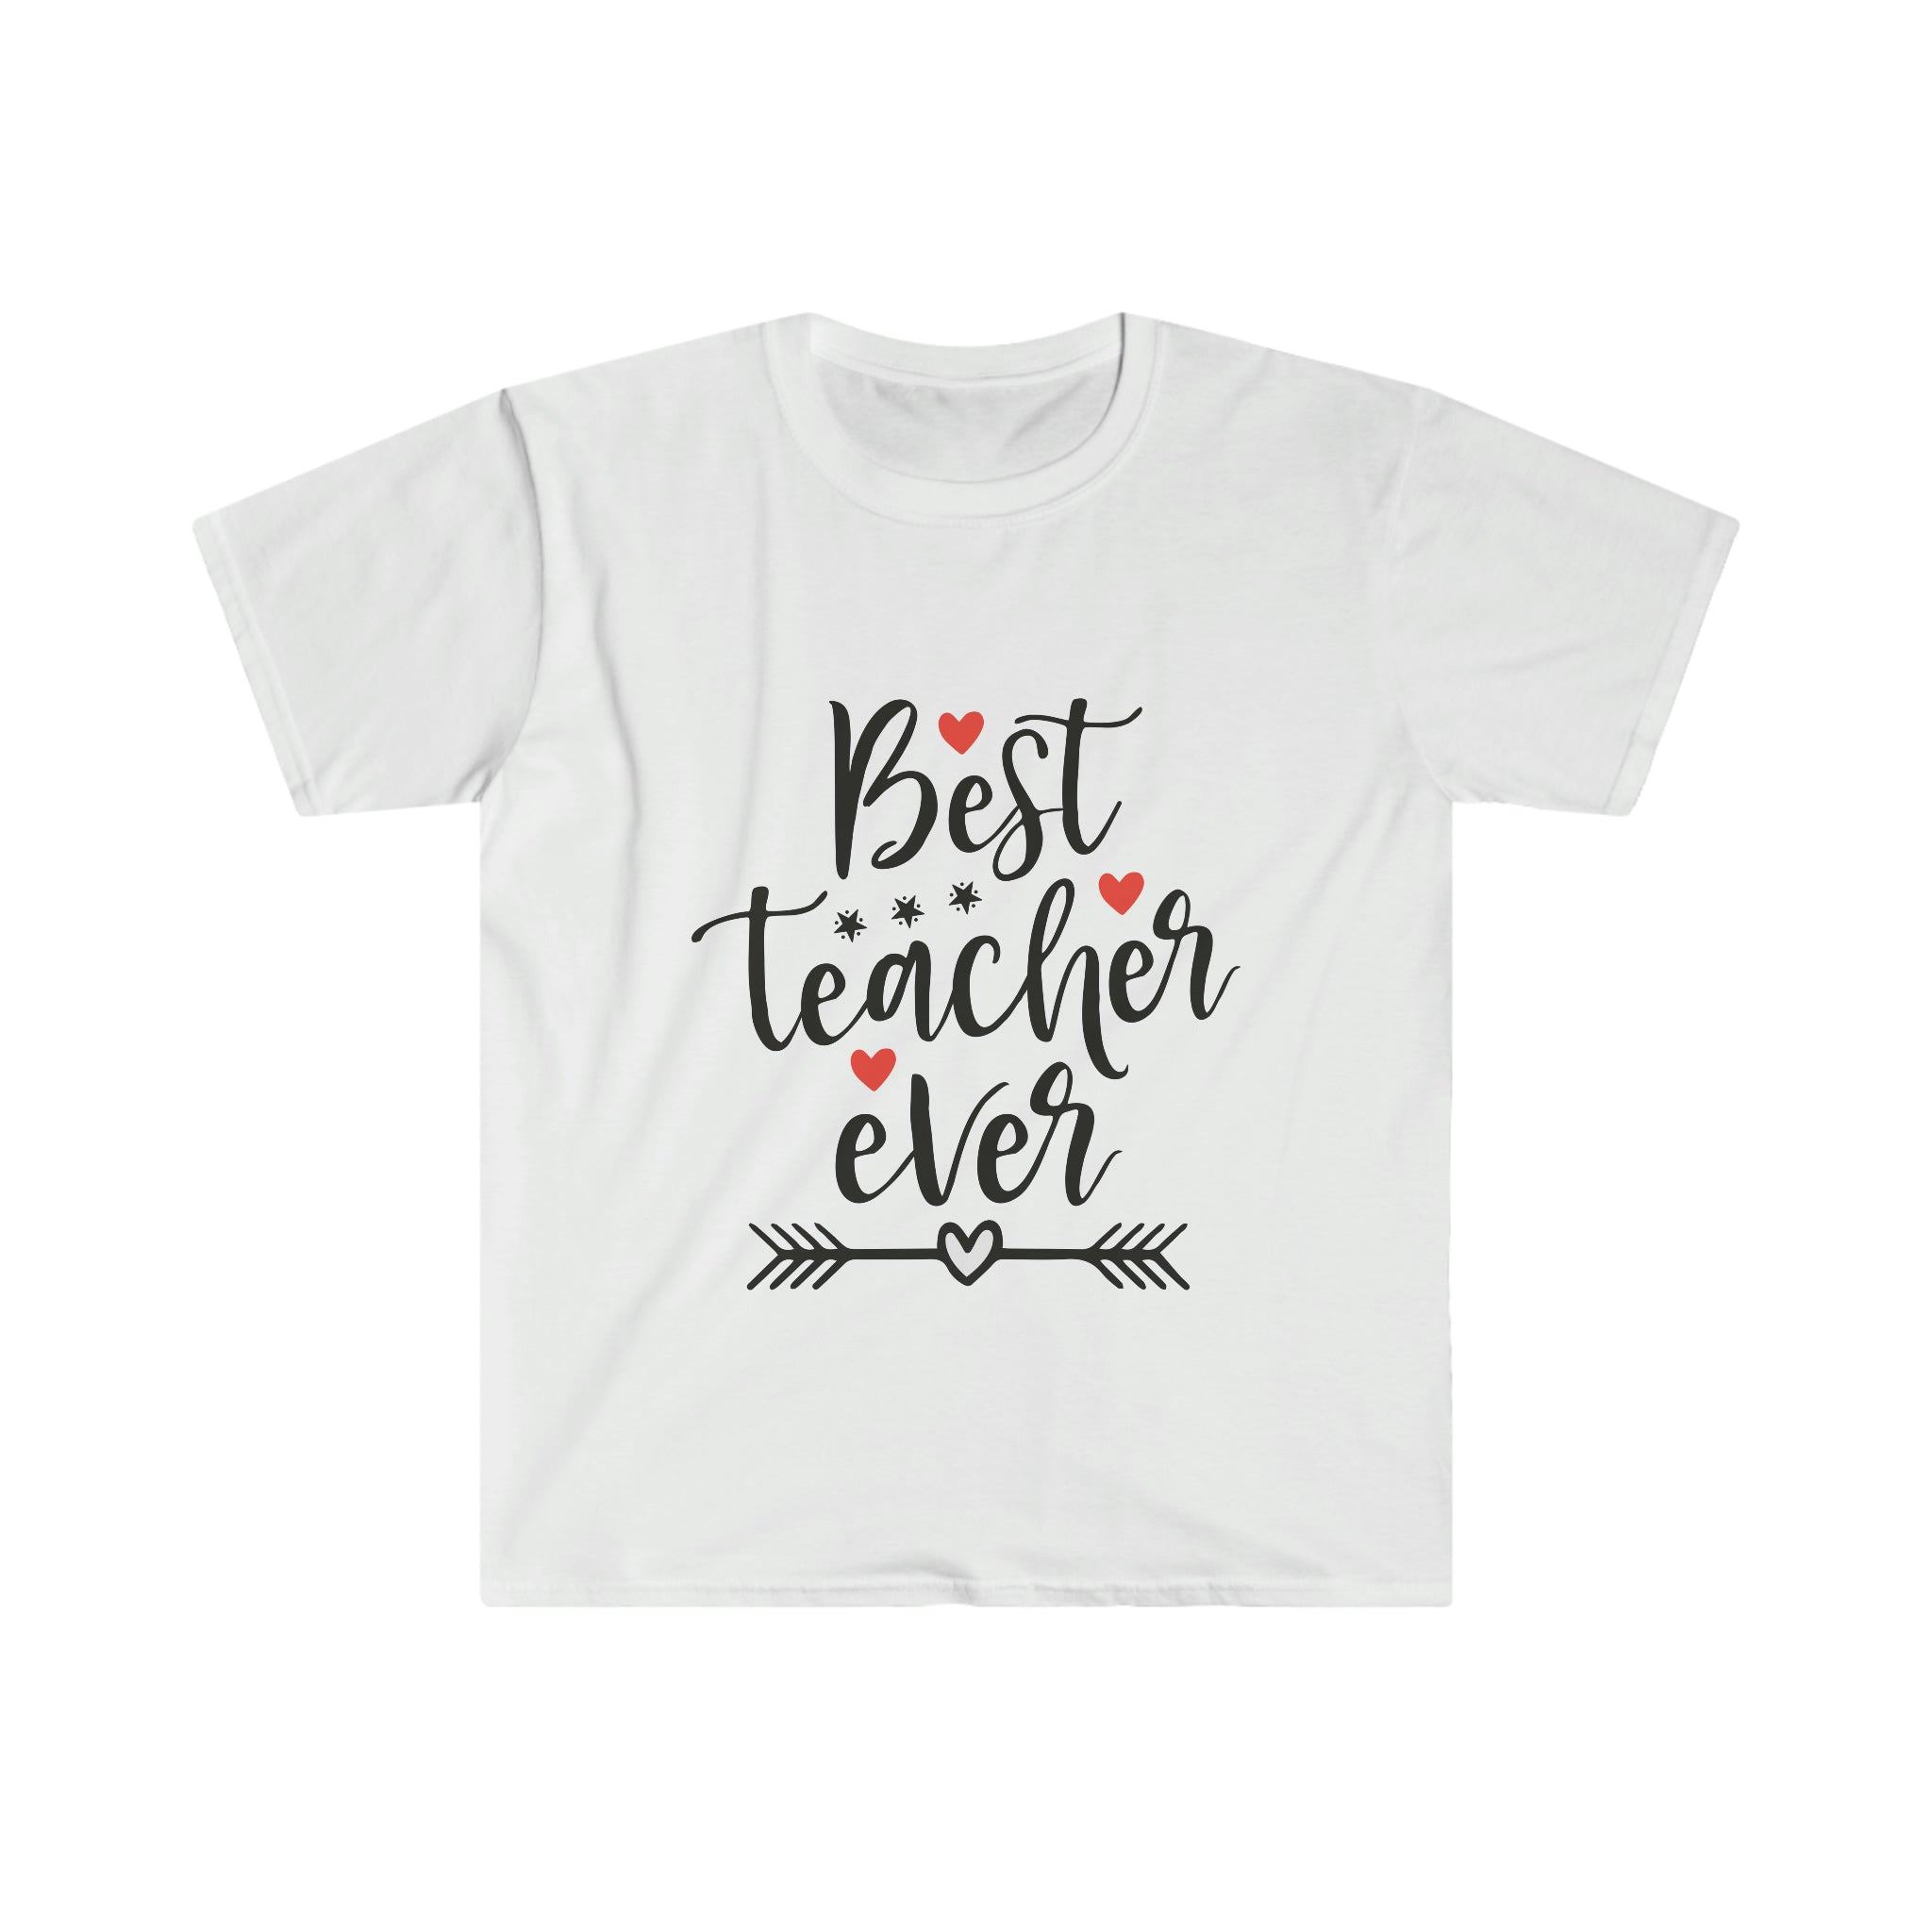 This high-quality, comfortable Best Teacher Ever T-Shirt proudly displays the words "best teacher ever".